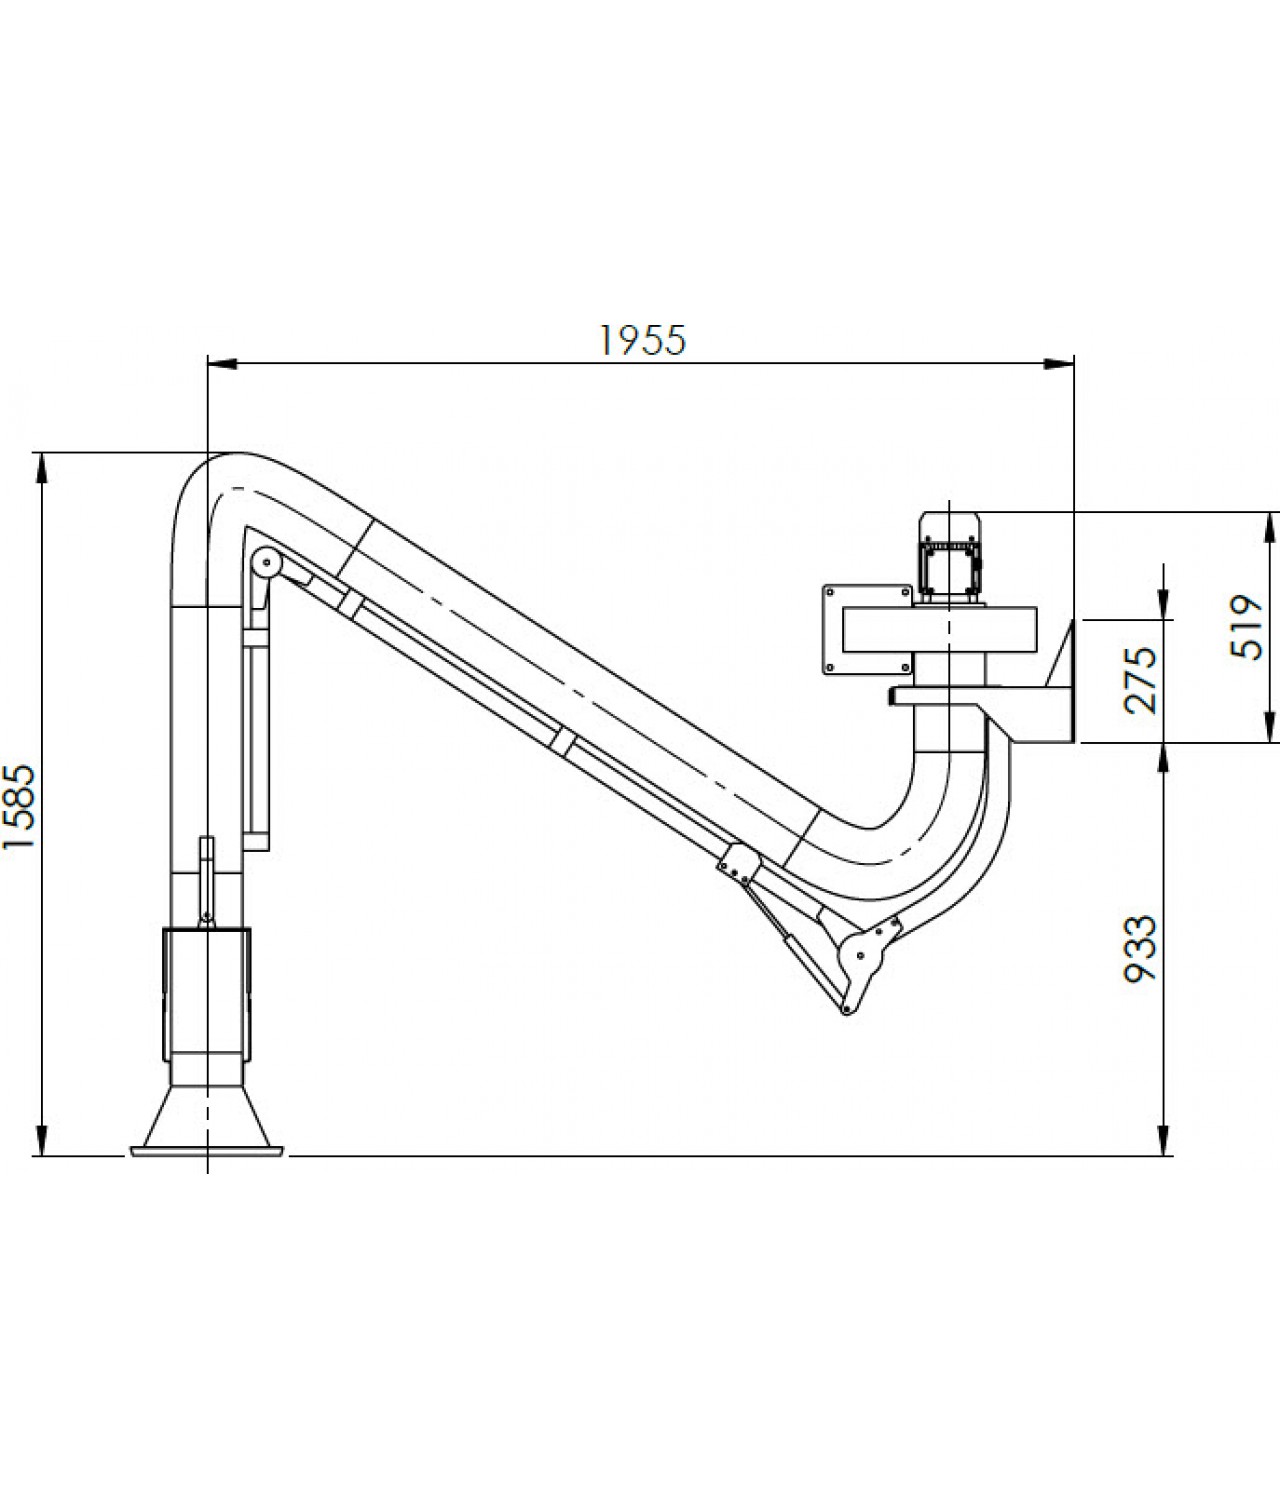 Welding fume extraction system SDNS-055 ≤1000 m³/h - drawing No.3